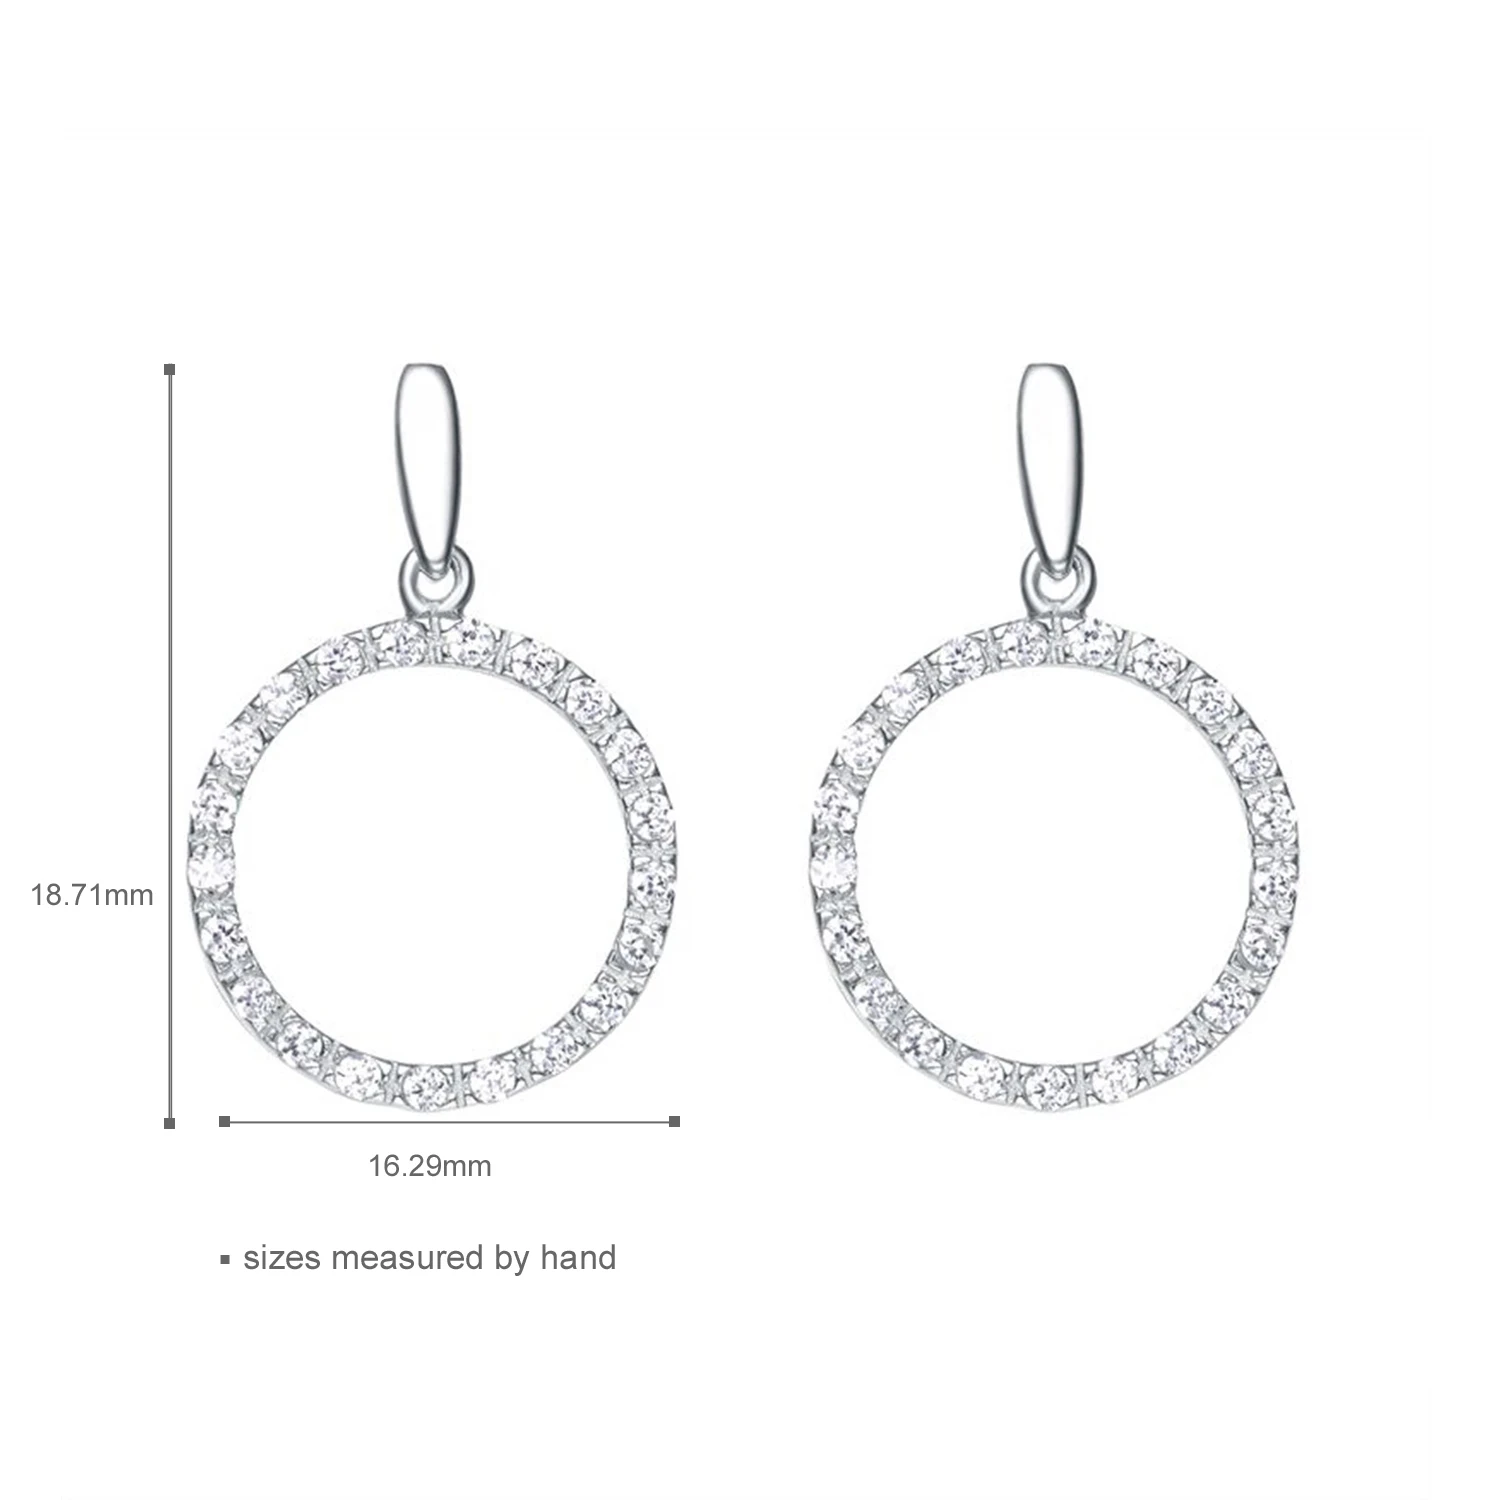 Rhodium Plated Minimalist Pendant Necklce Earrings 925 Sterling Silver High Quality Jewelry Set (图4)